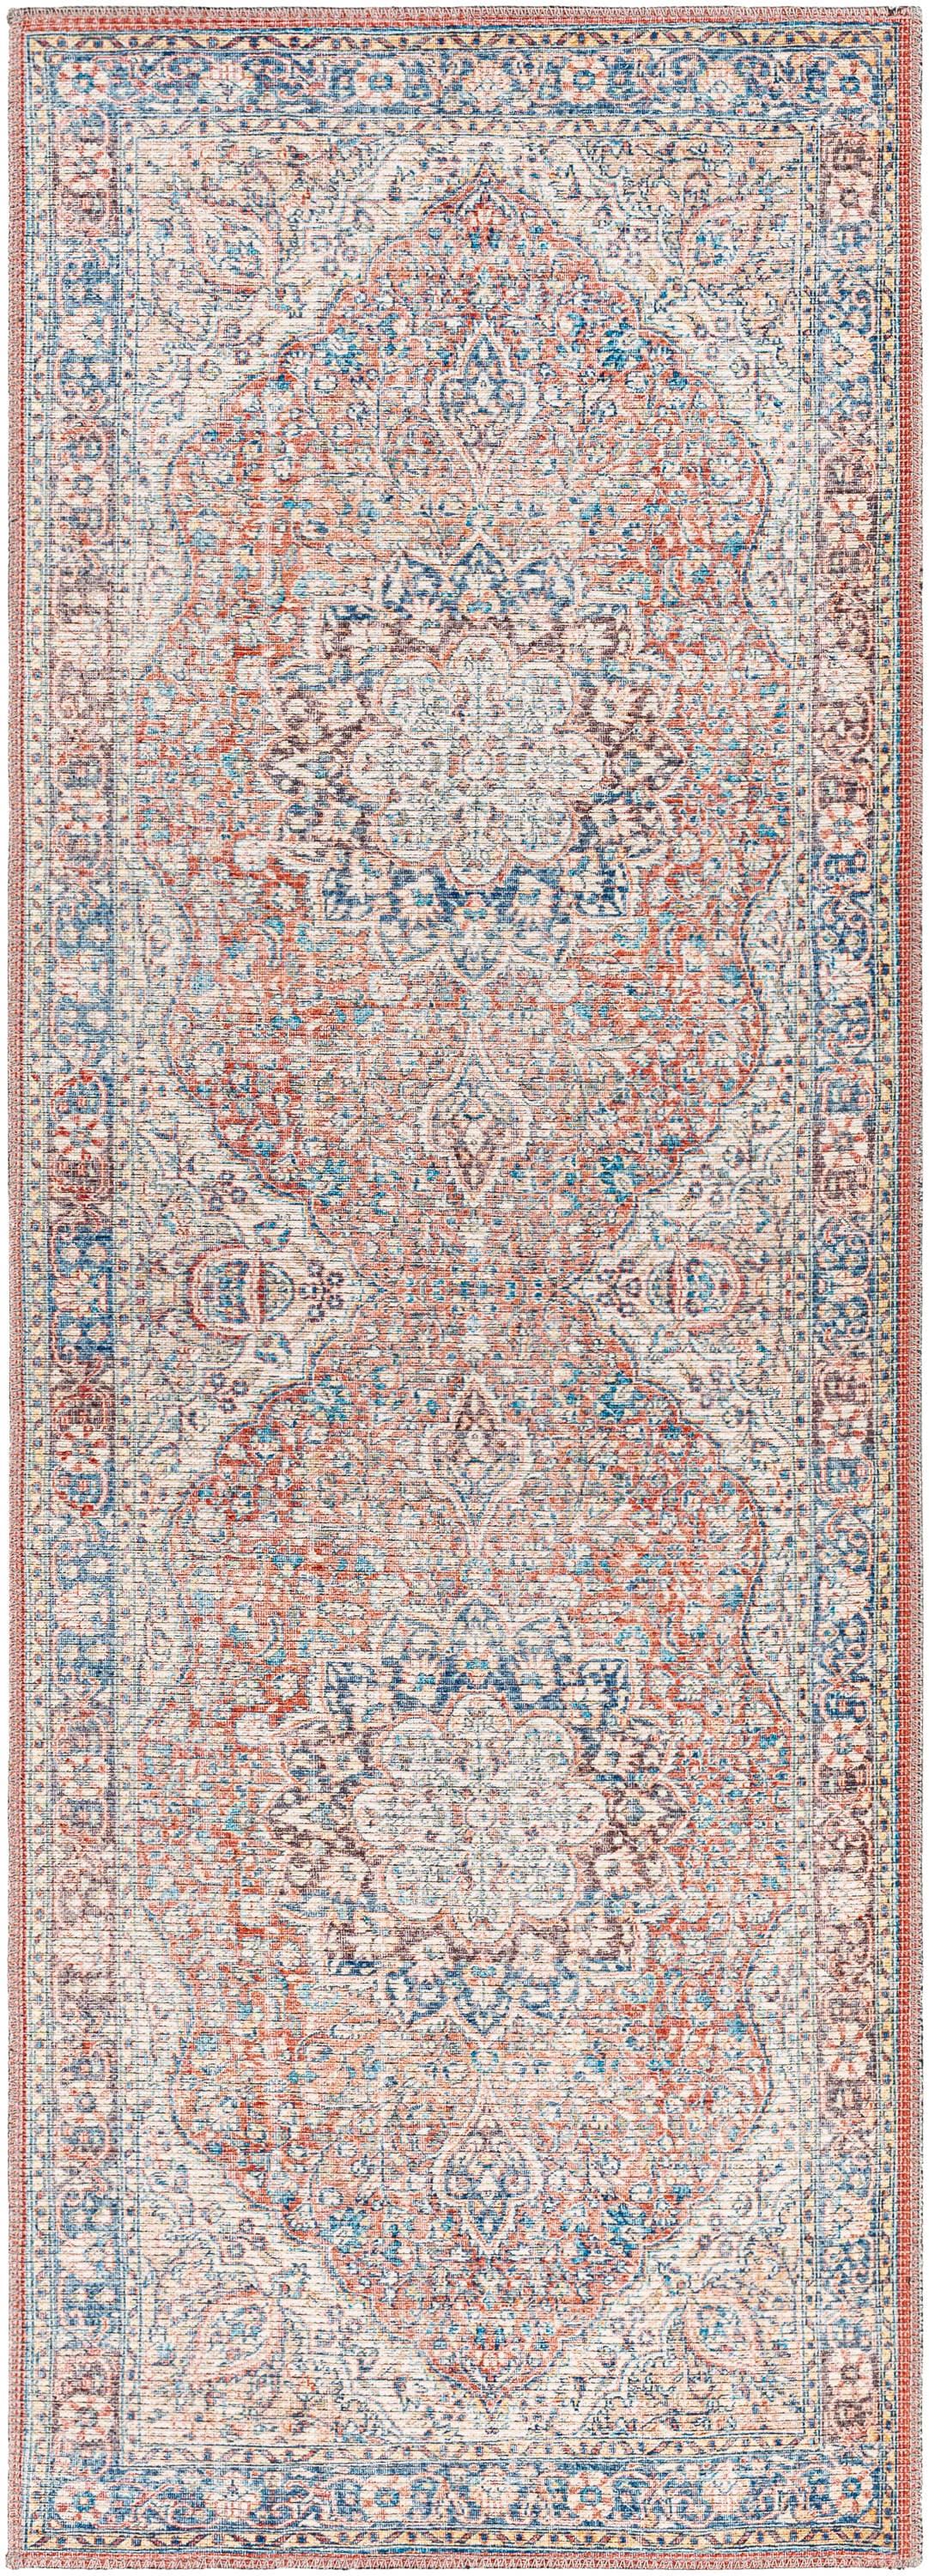 allen + roth with STAINMASTER Tess 2 X 7 (ft) Cream Indoor/Outdoor  Medallion Runner Rug in the Rugs department at